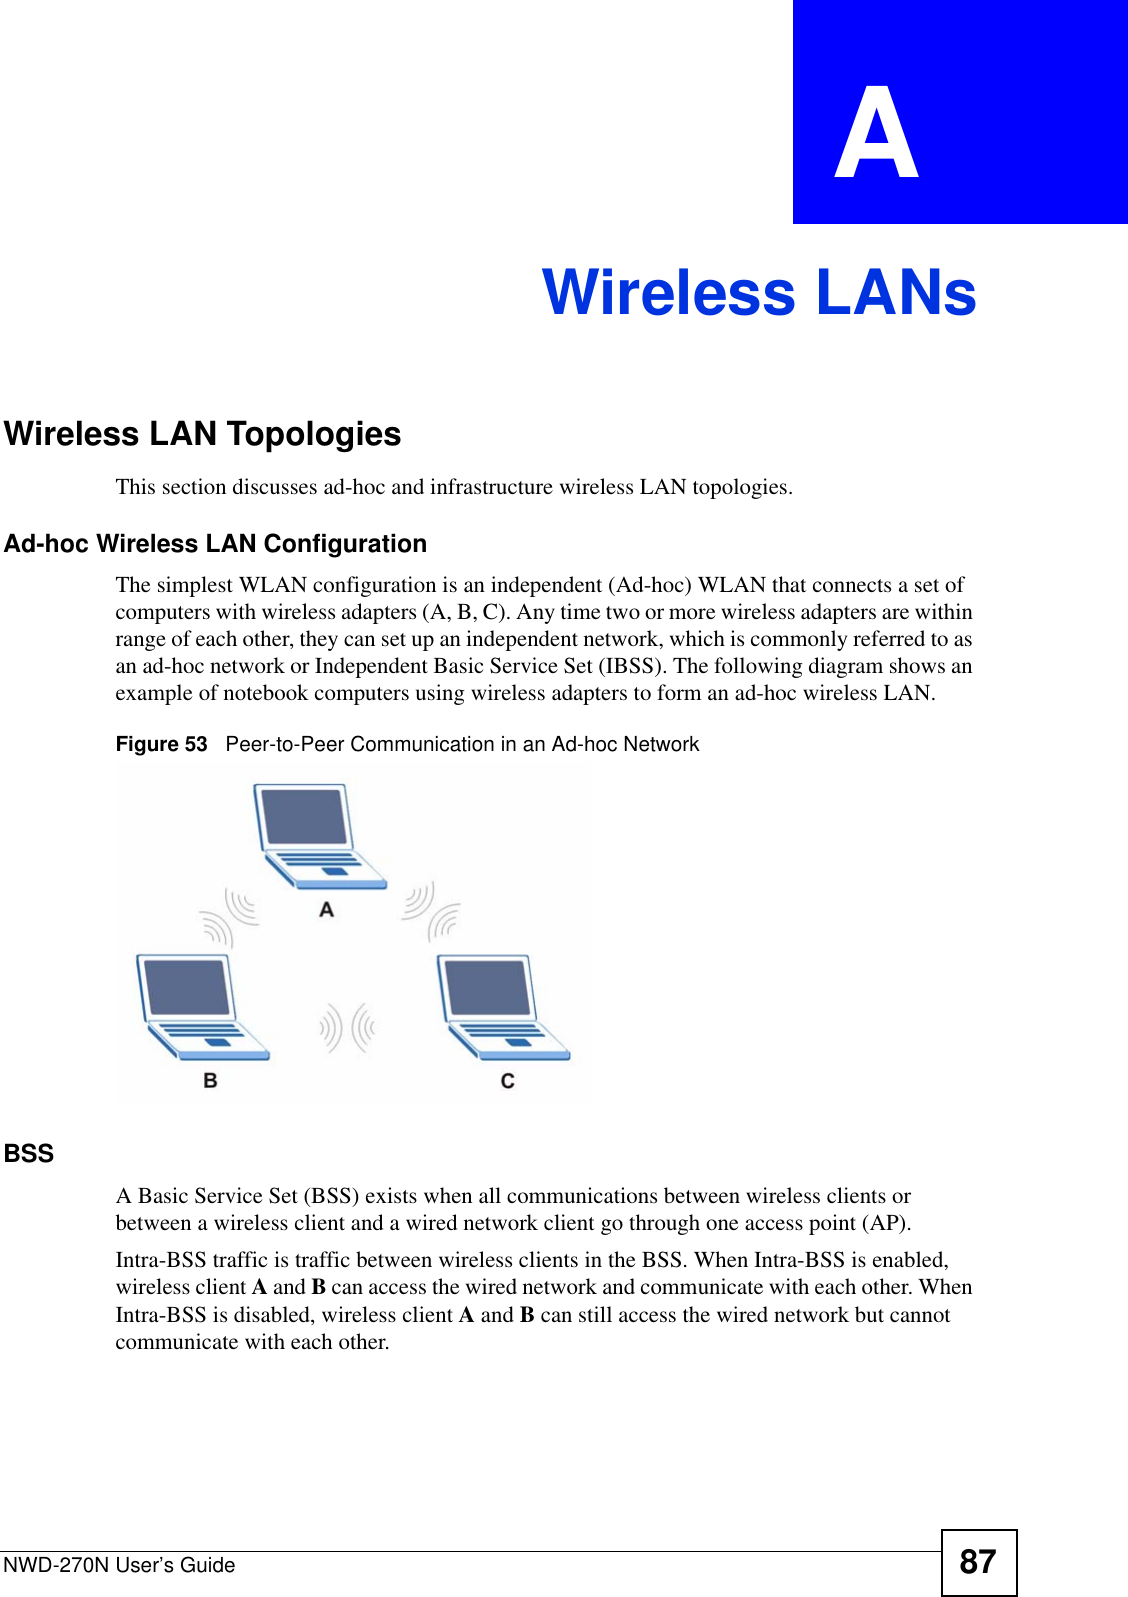 NWD-270N User’s Guide 87APPENDIX  A Wireless LANsWireless LAN TopologiesThis section discusses ad-hoc and infrastructure wireless LAN topologies.Ad-hoc Wireless LAN ConfigurationThe simplest WLAN configuration is an independent (Ad-hoc) WLAN that connects a set of computers with wireless adapters (A, B, C). Any time two or more wireless adapters are within range of each other, they can set up an independent network, which is commonly referred to as an ad-hoc network or Independent Basic Service Set (IBSS). The following diagram shows an example of notebook computers using wireless adapters to form an ad-hoc wireless LAN. Figure 53   Peer-to-Peer Communication in an Ad-hoc NetworkBSSA Basic Service Set (BSS) exists when all communications between wireless clients or between a wireless client and a wired network client go through one access point (AP). Intra-BSS traffic is traffic between wireless clients in the BSS. When Intra-BSS is enabled, wireless client A and B can access the wired network and communicate with each other. When Intra-BSS is disabled, wireless client A and B can still access the wired network but cannot communicate with each other.